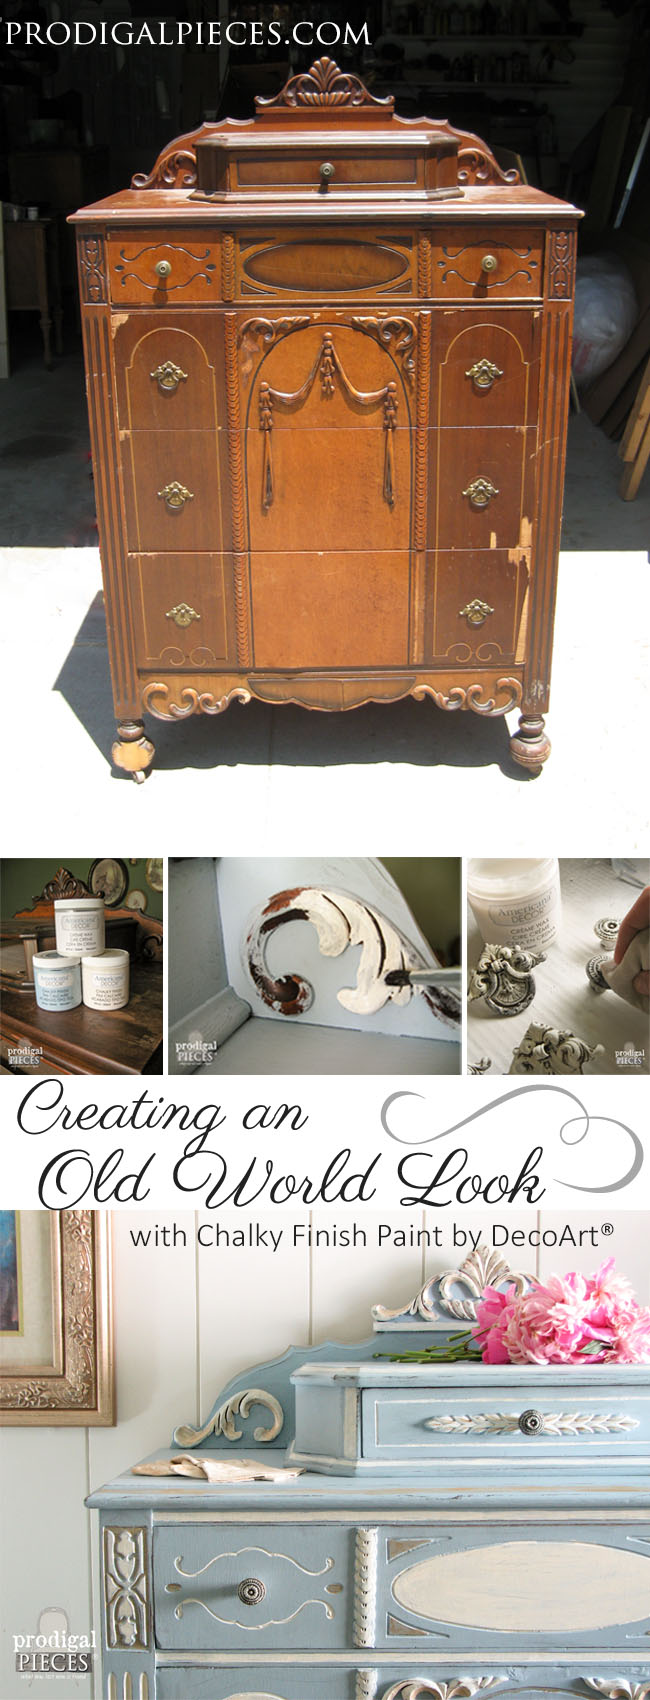 Creating an Old Work Look with Paint by Prodigal Pieces | prodigalpieces.com